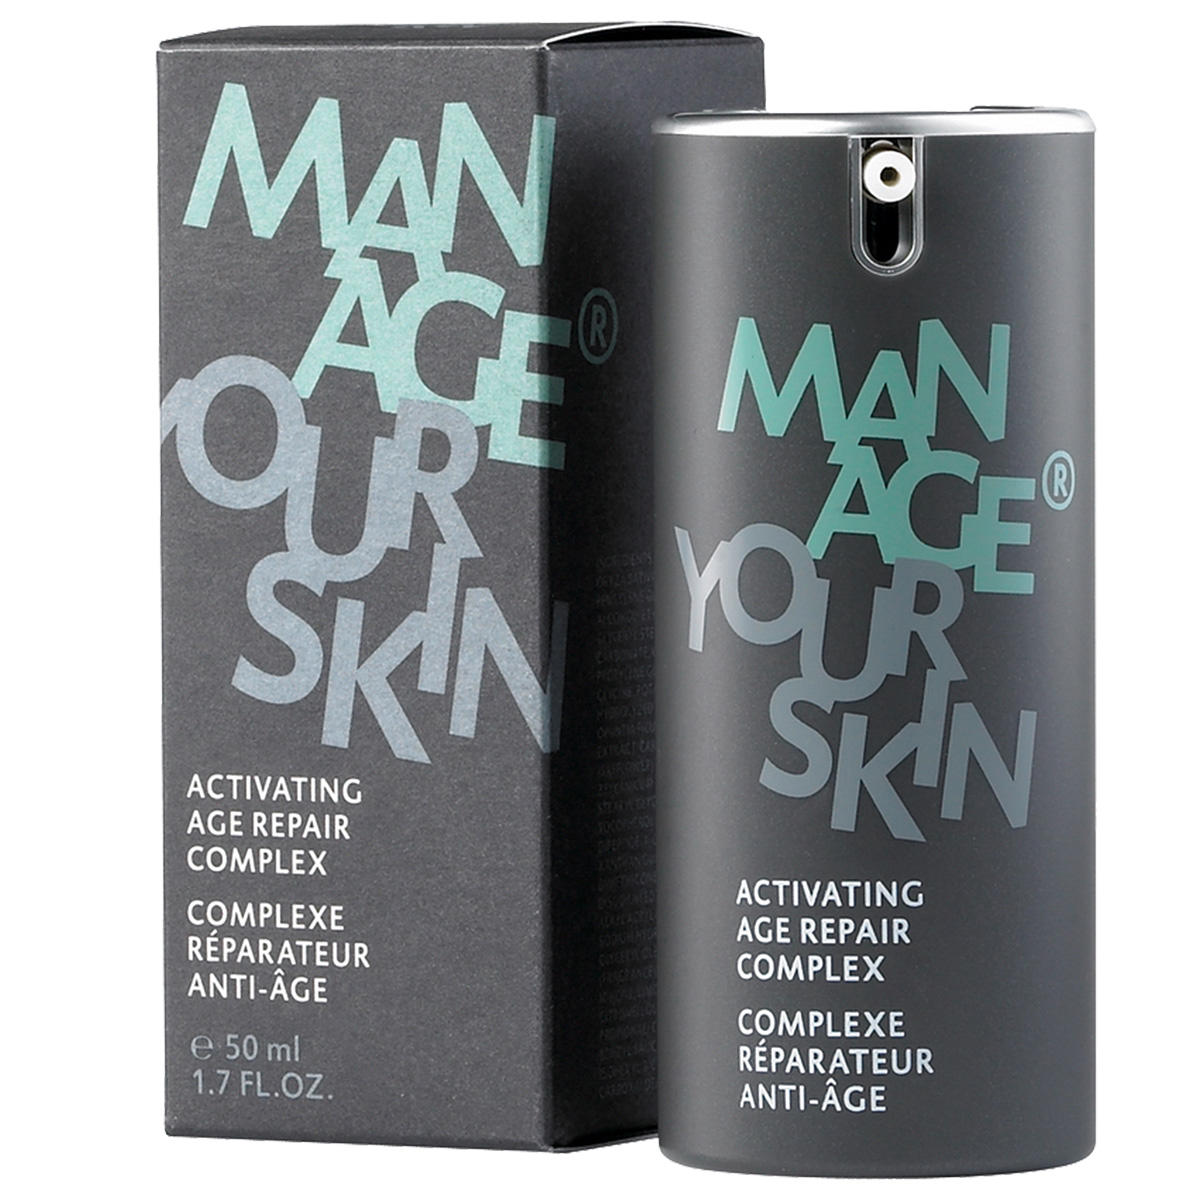 Manage Your Skin ACTIVATING AGE REPAIR COMPLEX 50 ml - 2